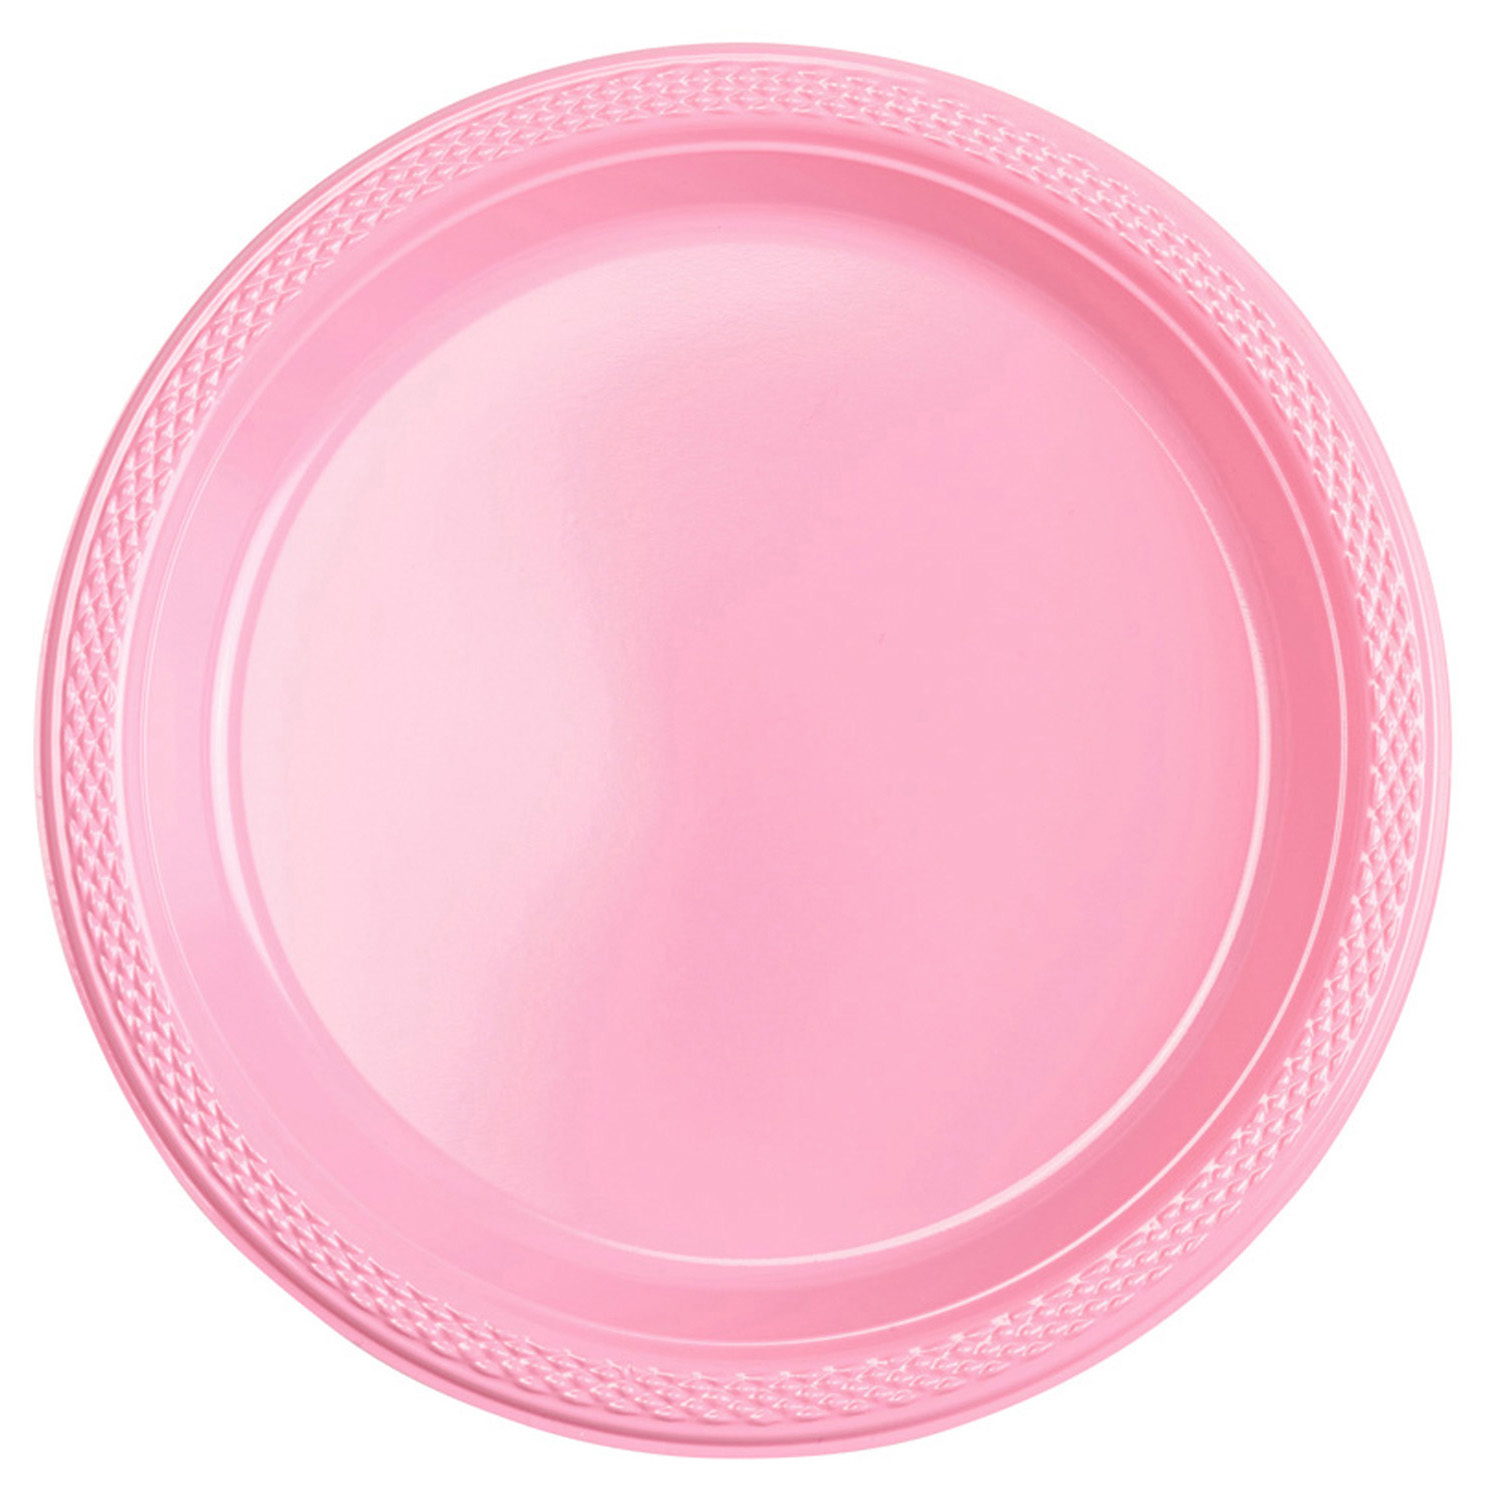 20 Plates New Pink Plastic Round 22.8 cm Amscan Europe